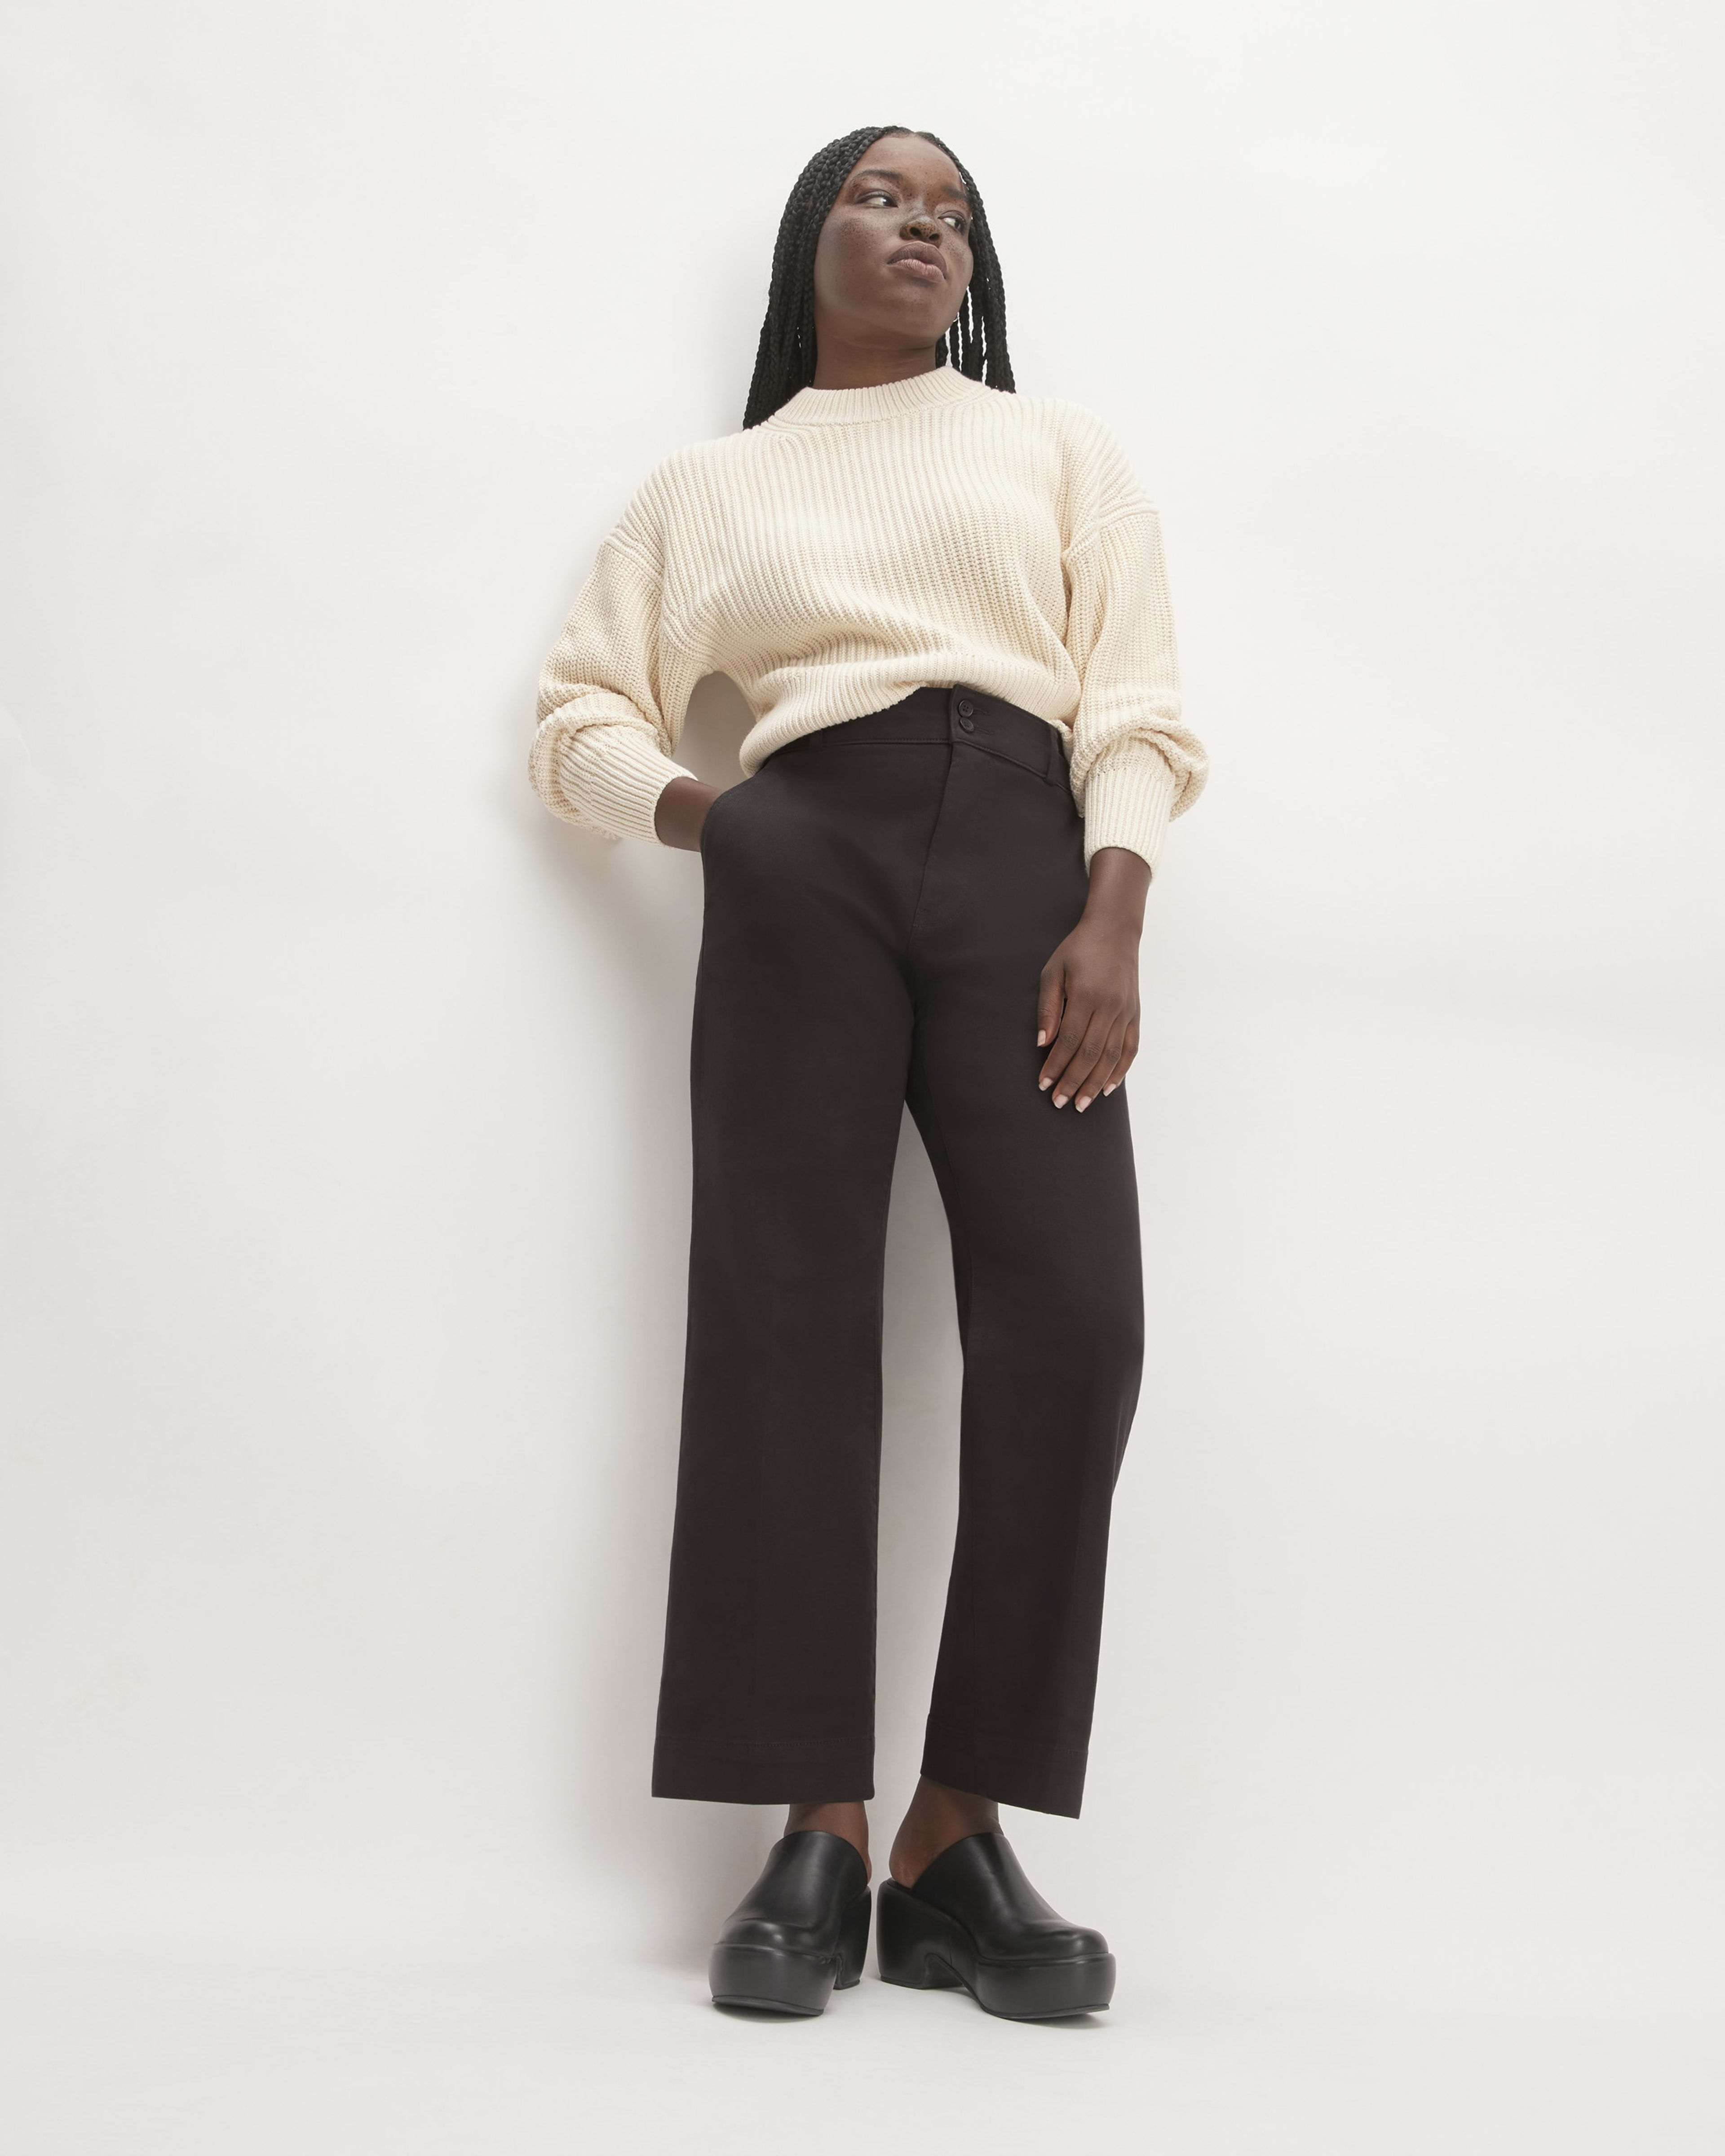 Black Cropped Kick Flare Trousers